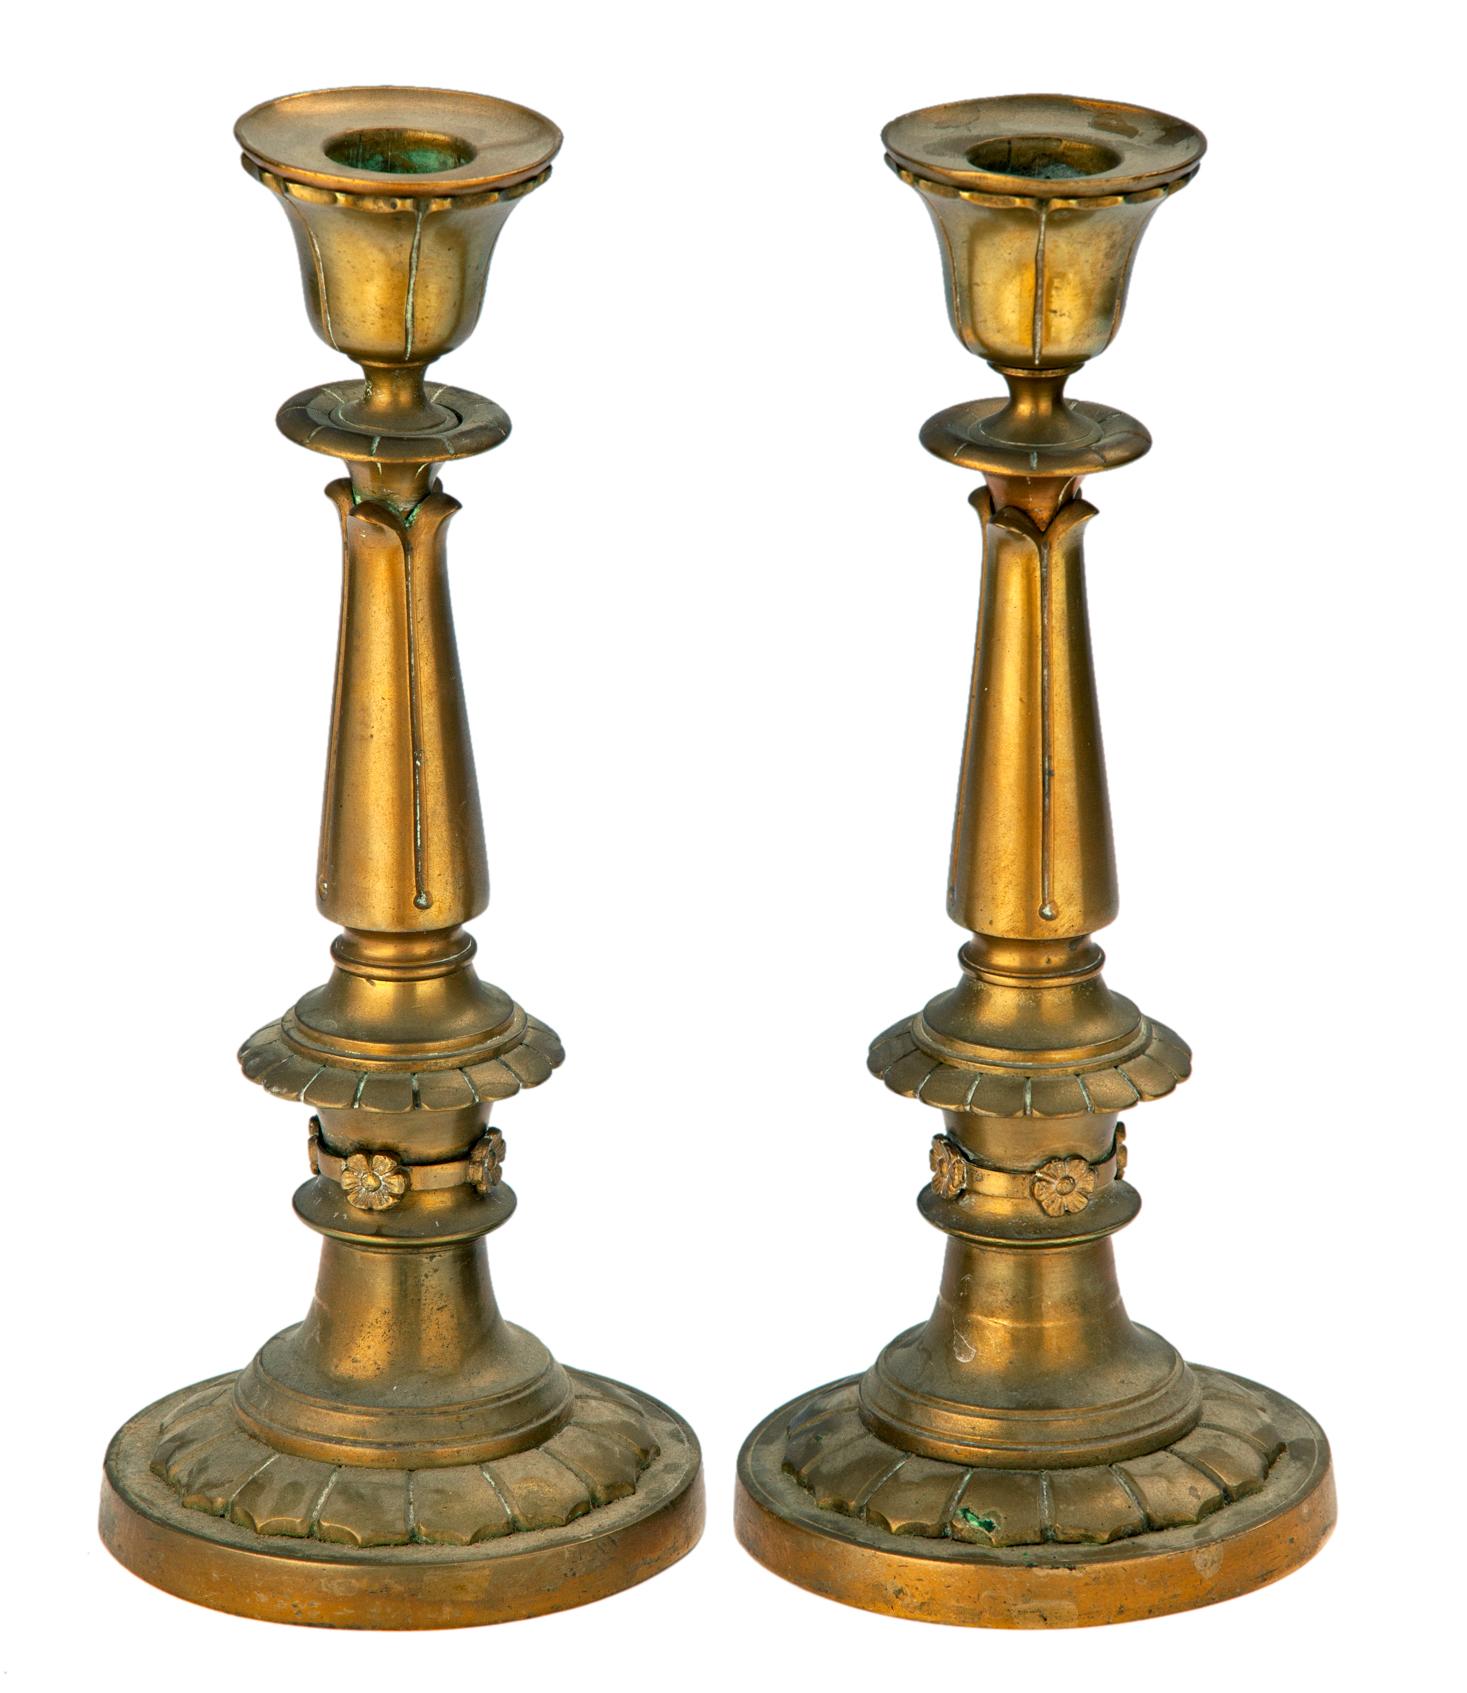 This pair of beautiful brass candlesticks have classical simplicity.
Finely crafted in the distinct style of the 1st empire period in France. 
Quite heavy with a smooth patina, 
Adorned with decorative motifs & banded with small, linked flowers.